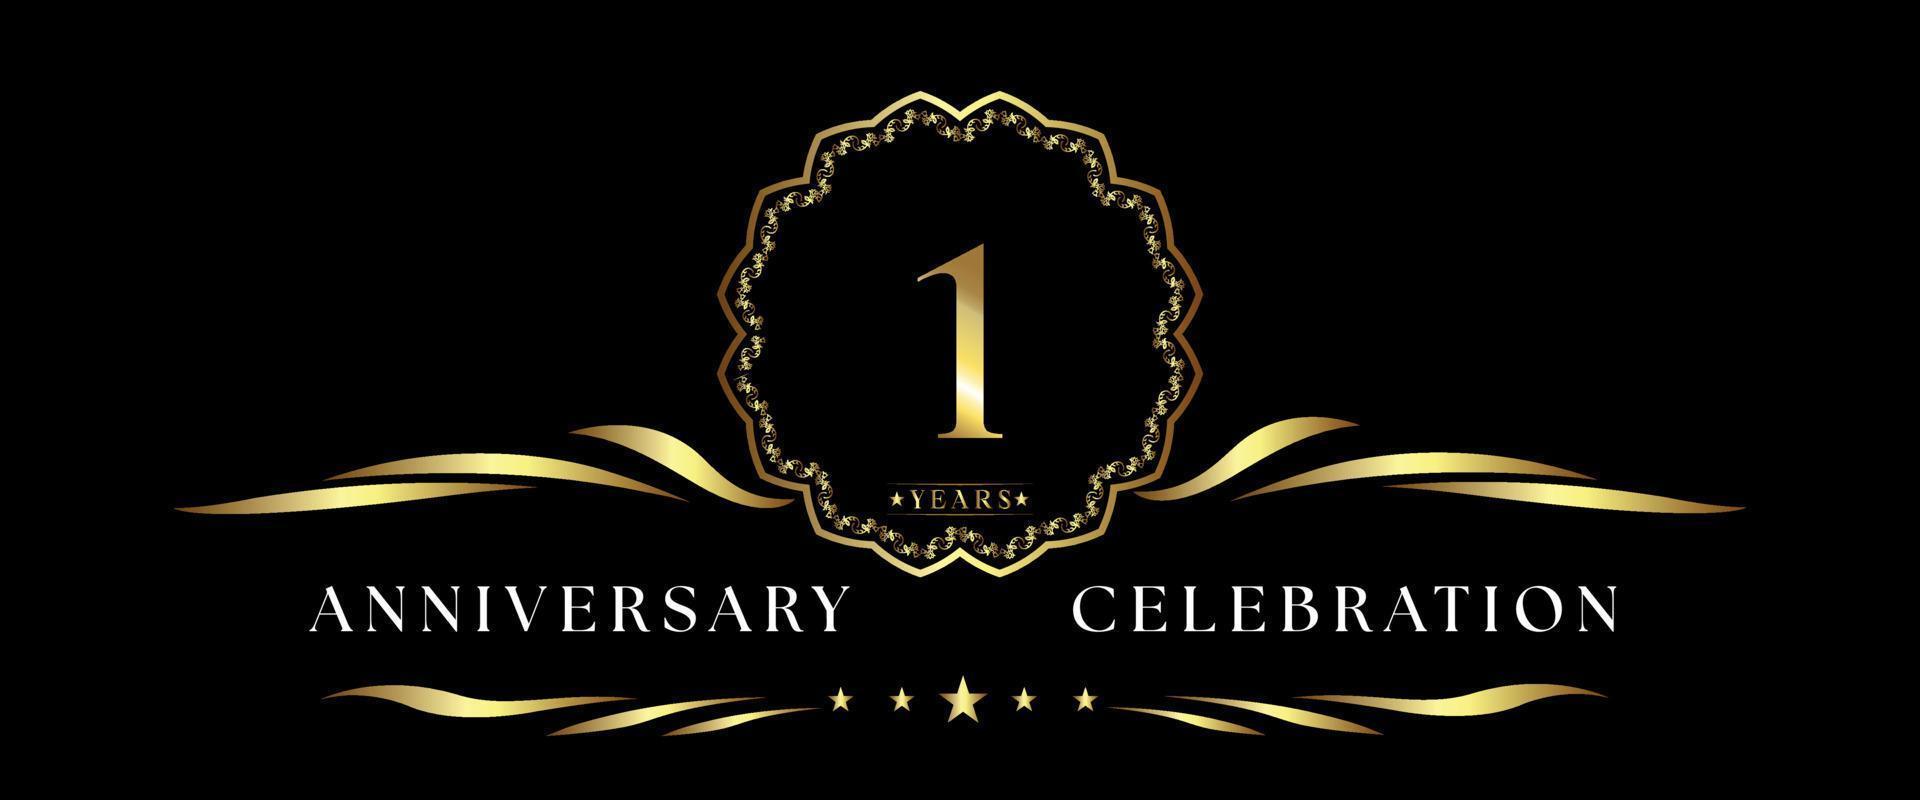 1 years anniversary celebration with gold decorative frame isolated on black background. Vector design for greeting card, birthday party, wedding, event party, ceremony. 1 years Anniversary logo.